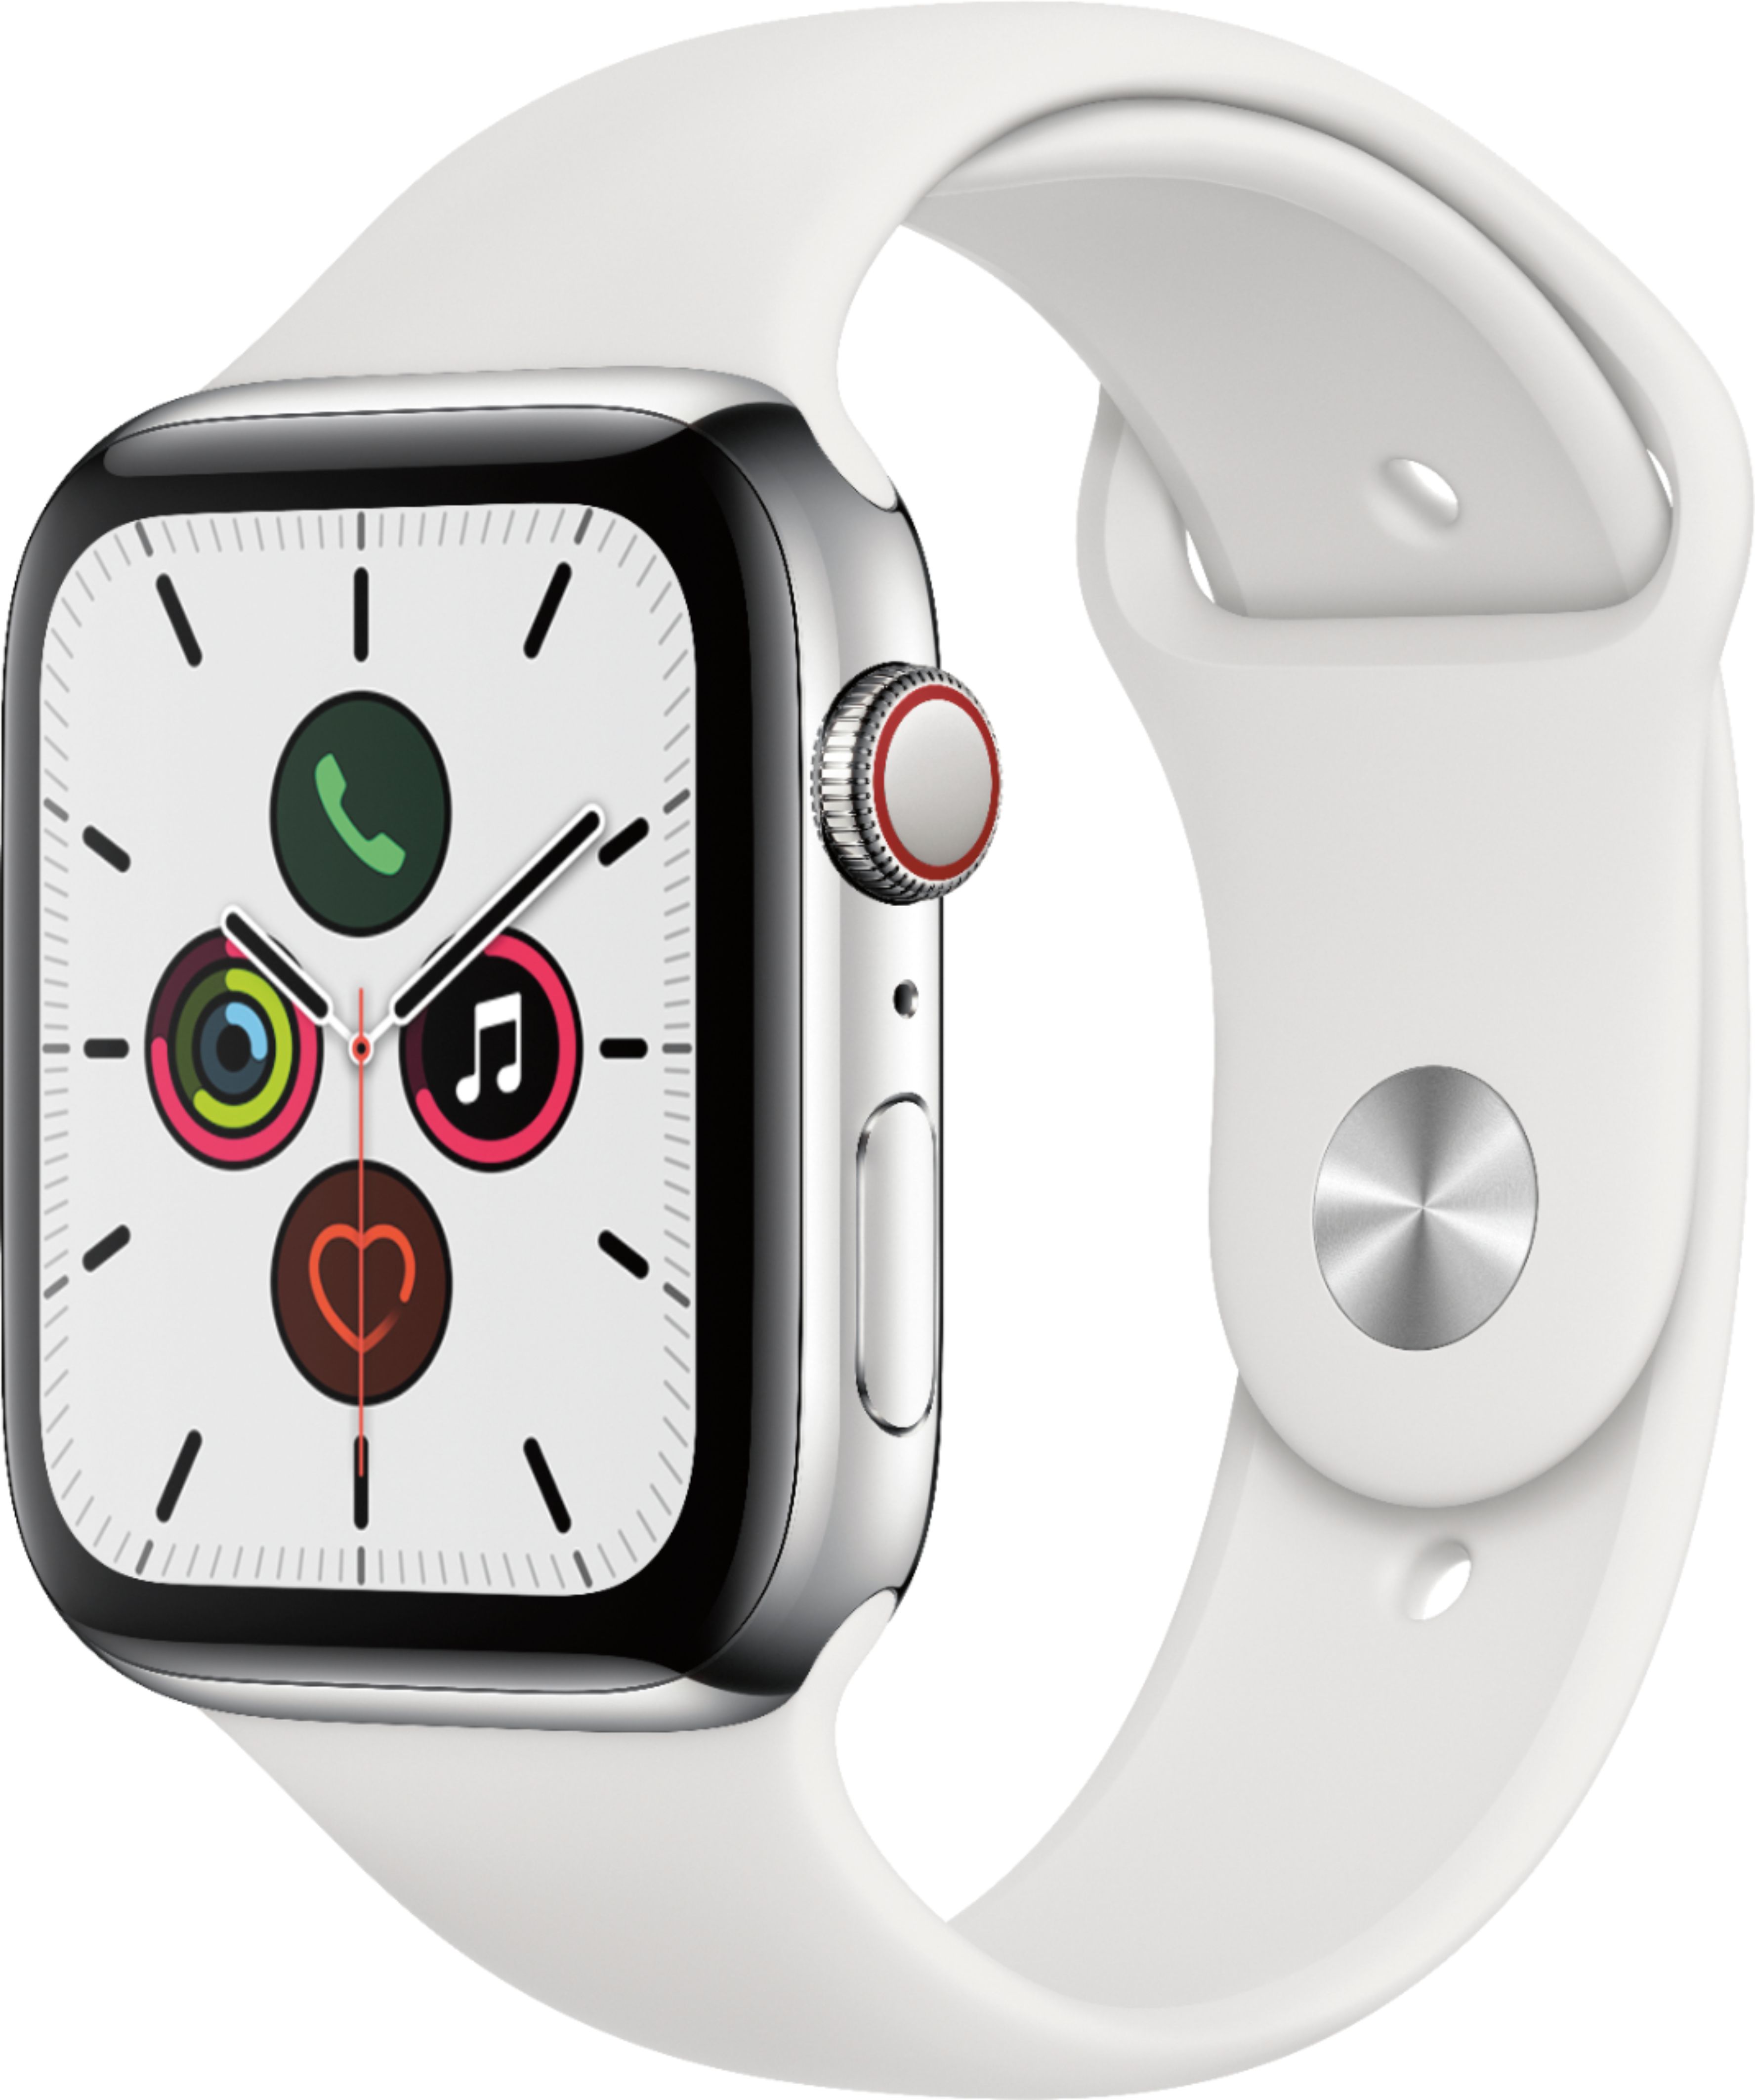 Best Buy: Apple Watch Series 5 (GPS + Cellular) 44mm Stainless Steel Case  with Black Sport Band Stainless Steel (AT&T) MWW22LL/A